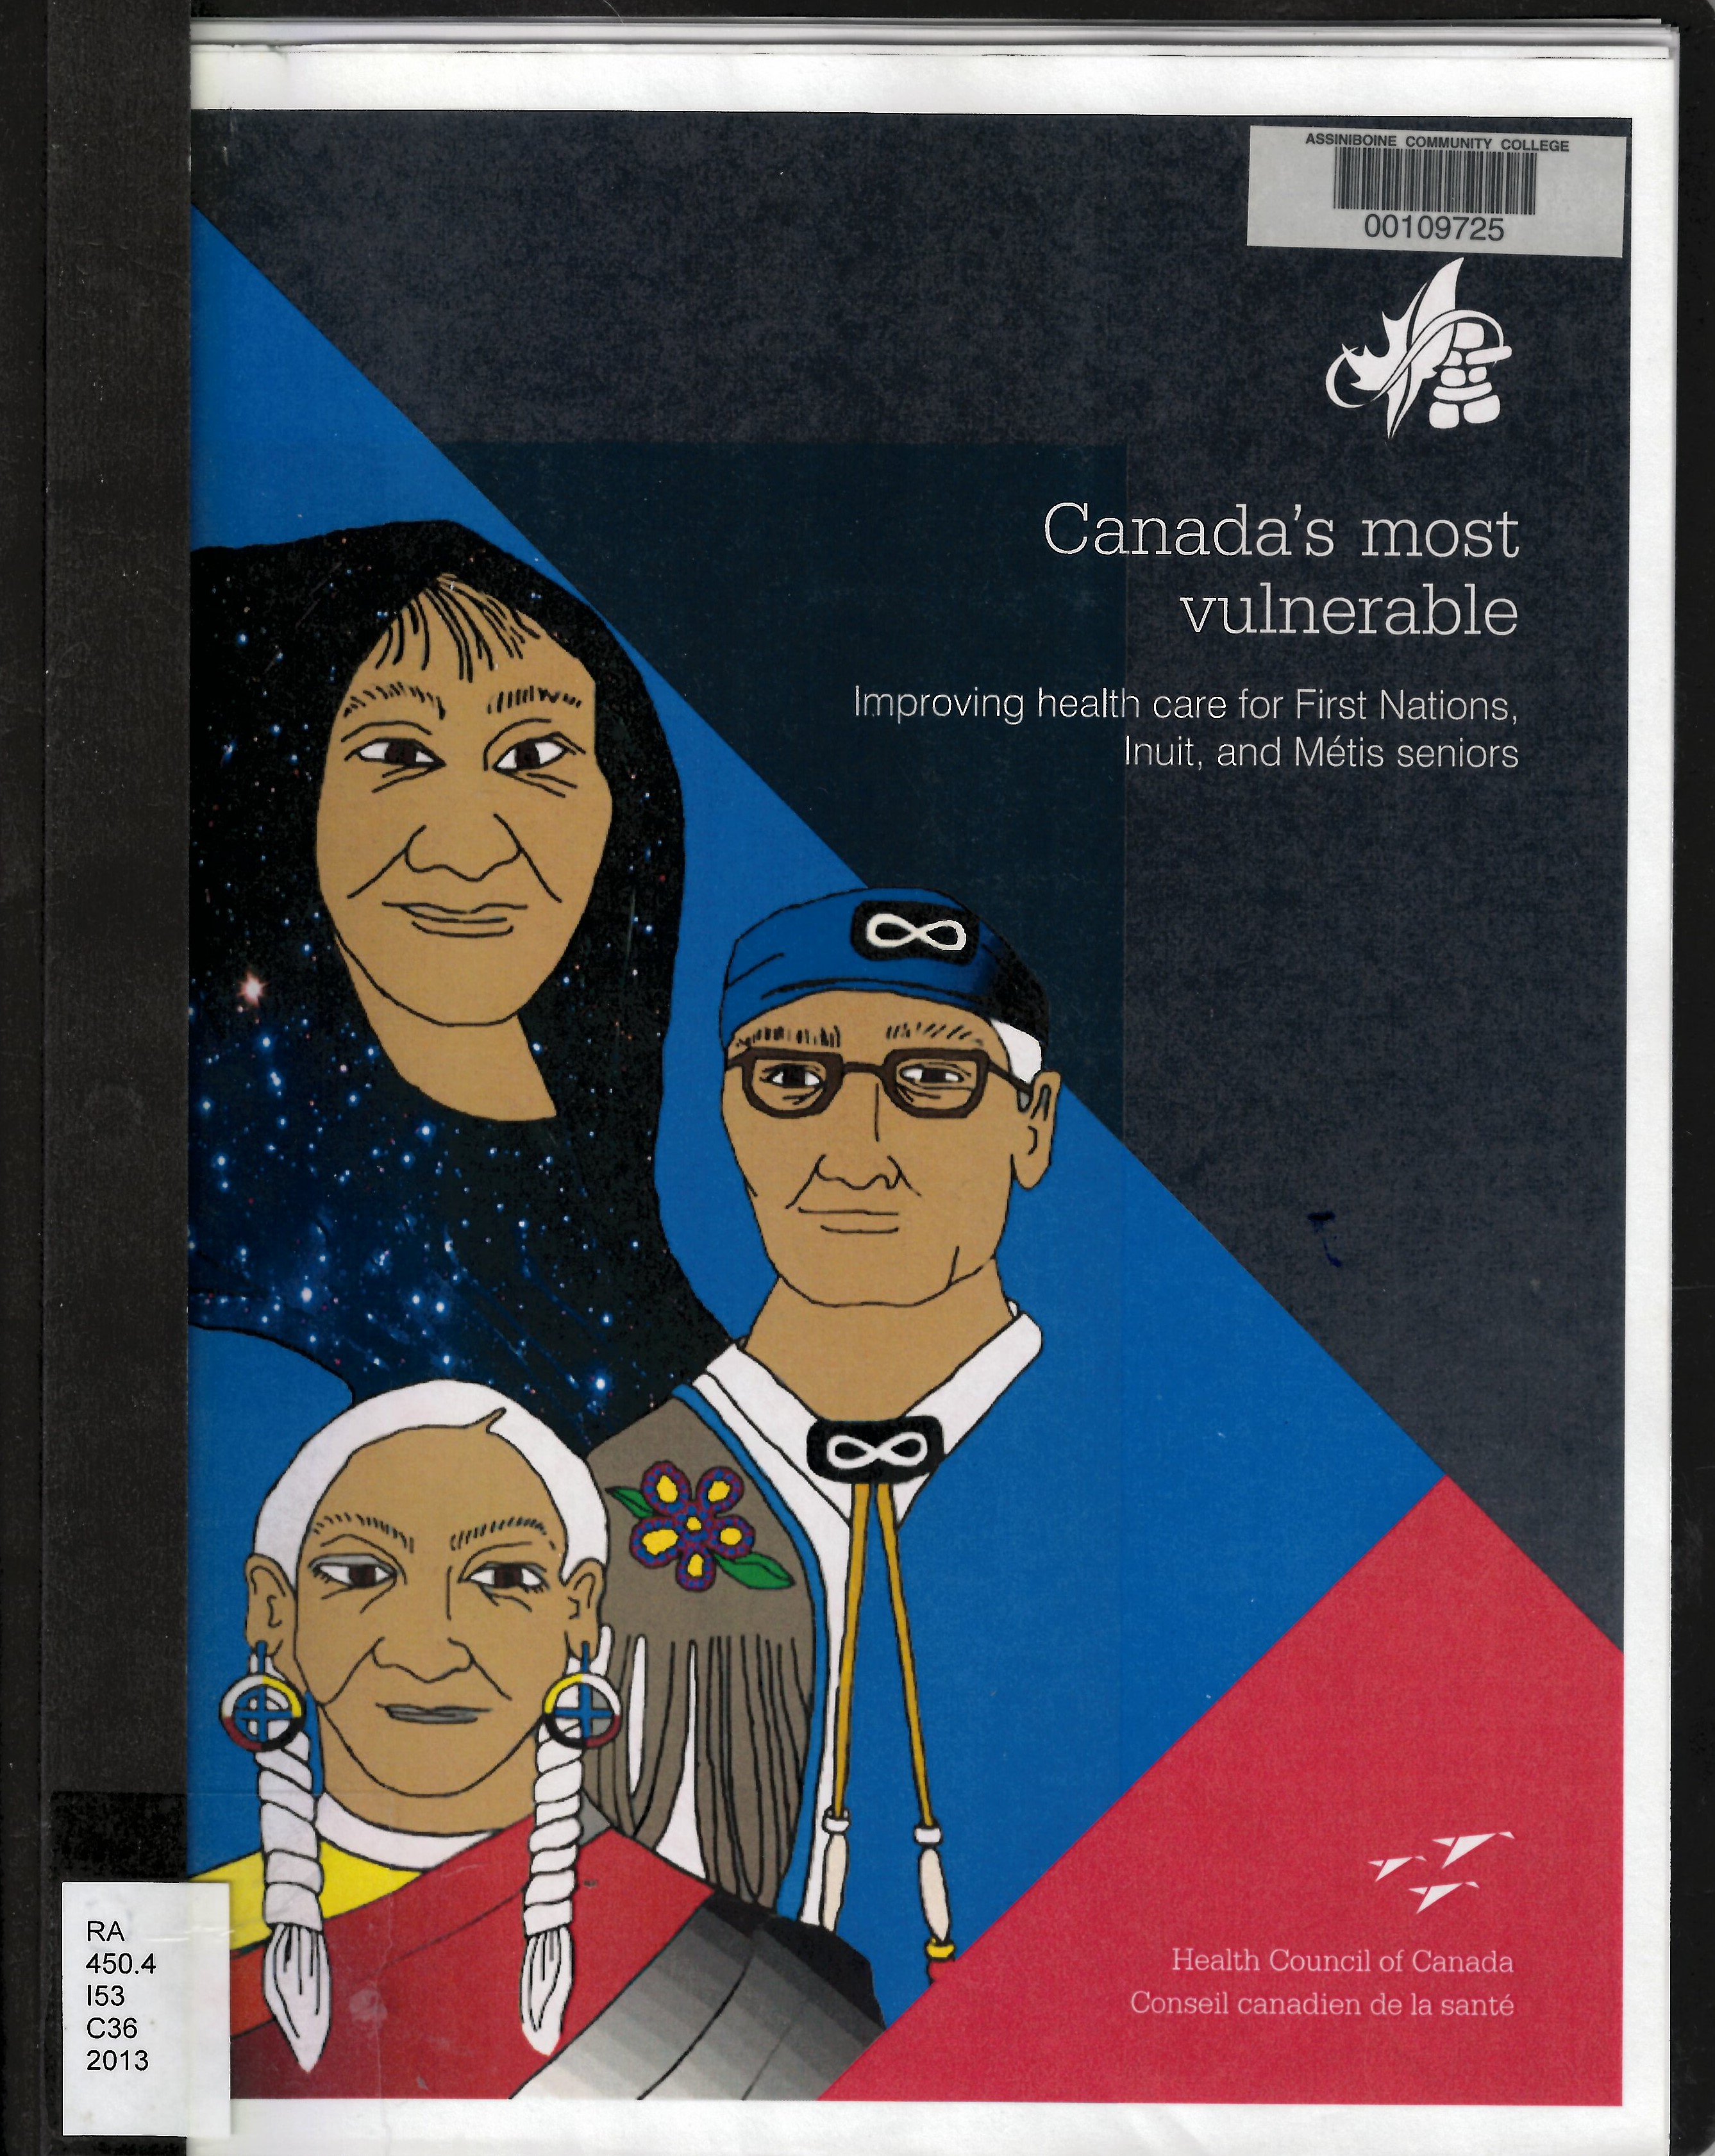 Canada's most vulnerable : improving health care for First Nations, Inuit and Métis seniors